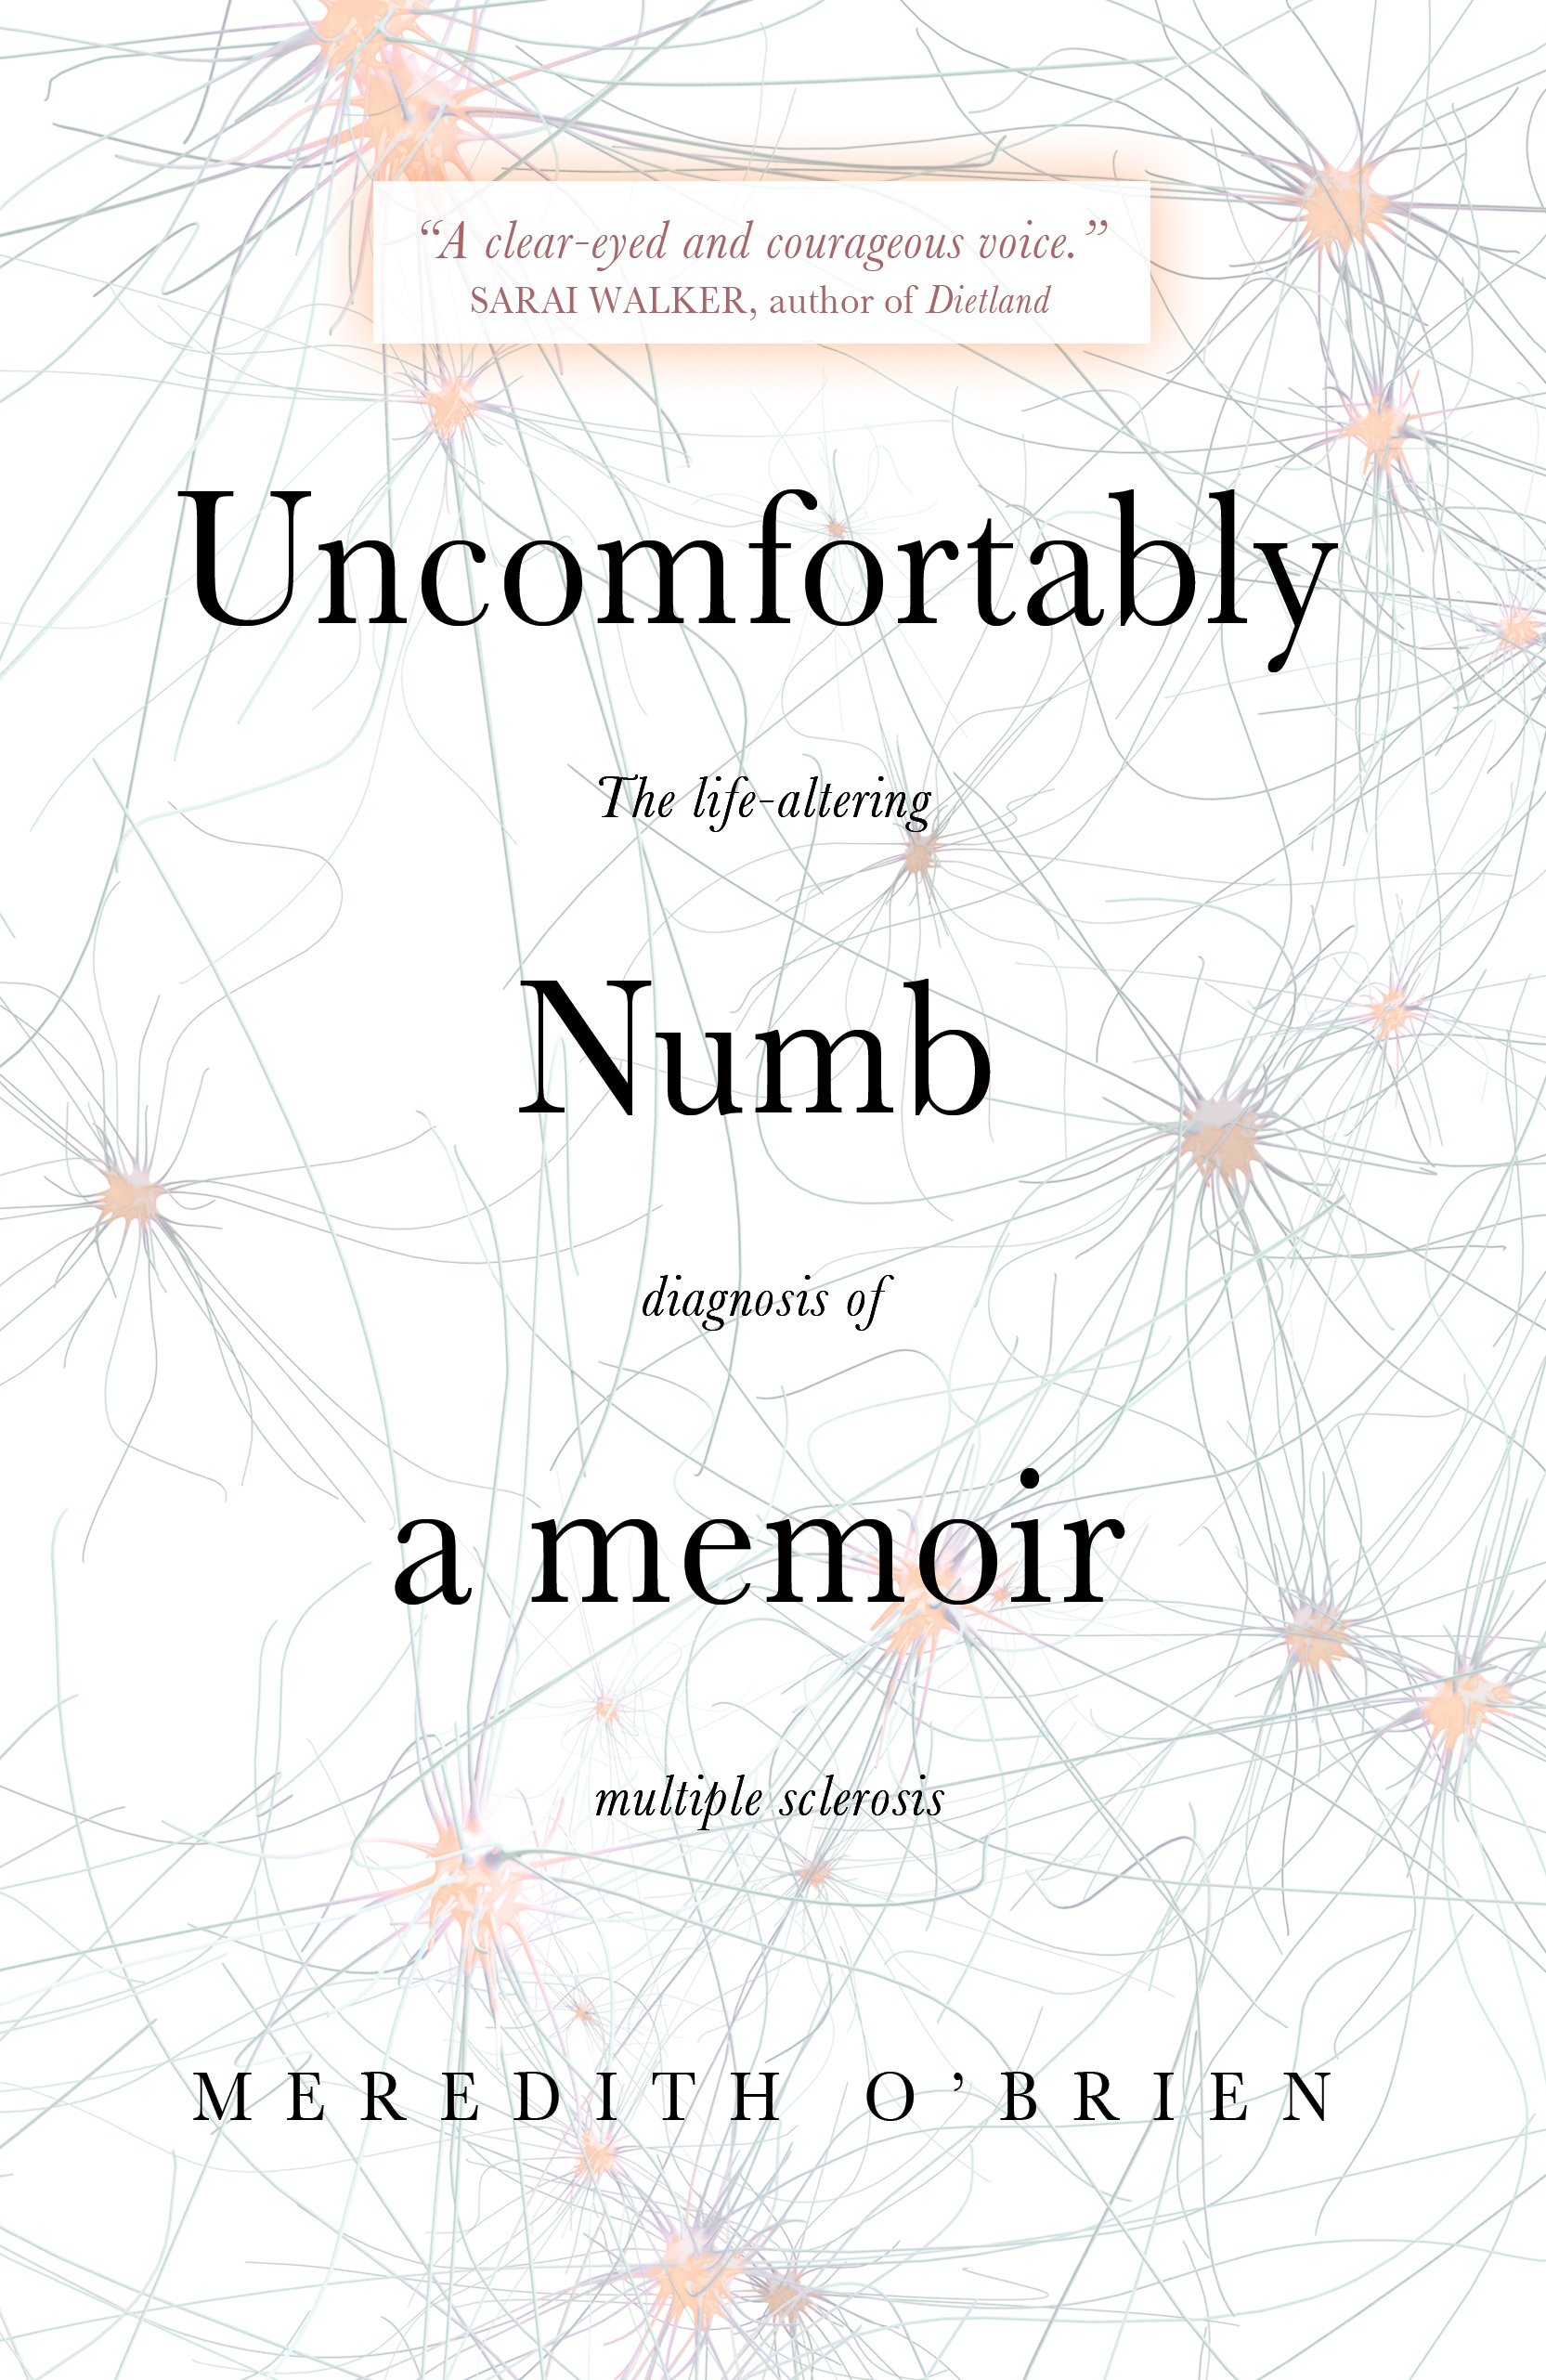 "Uncomfortably Numb" by Meredith O'Brien